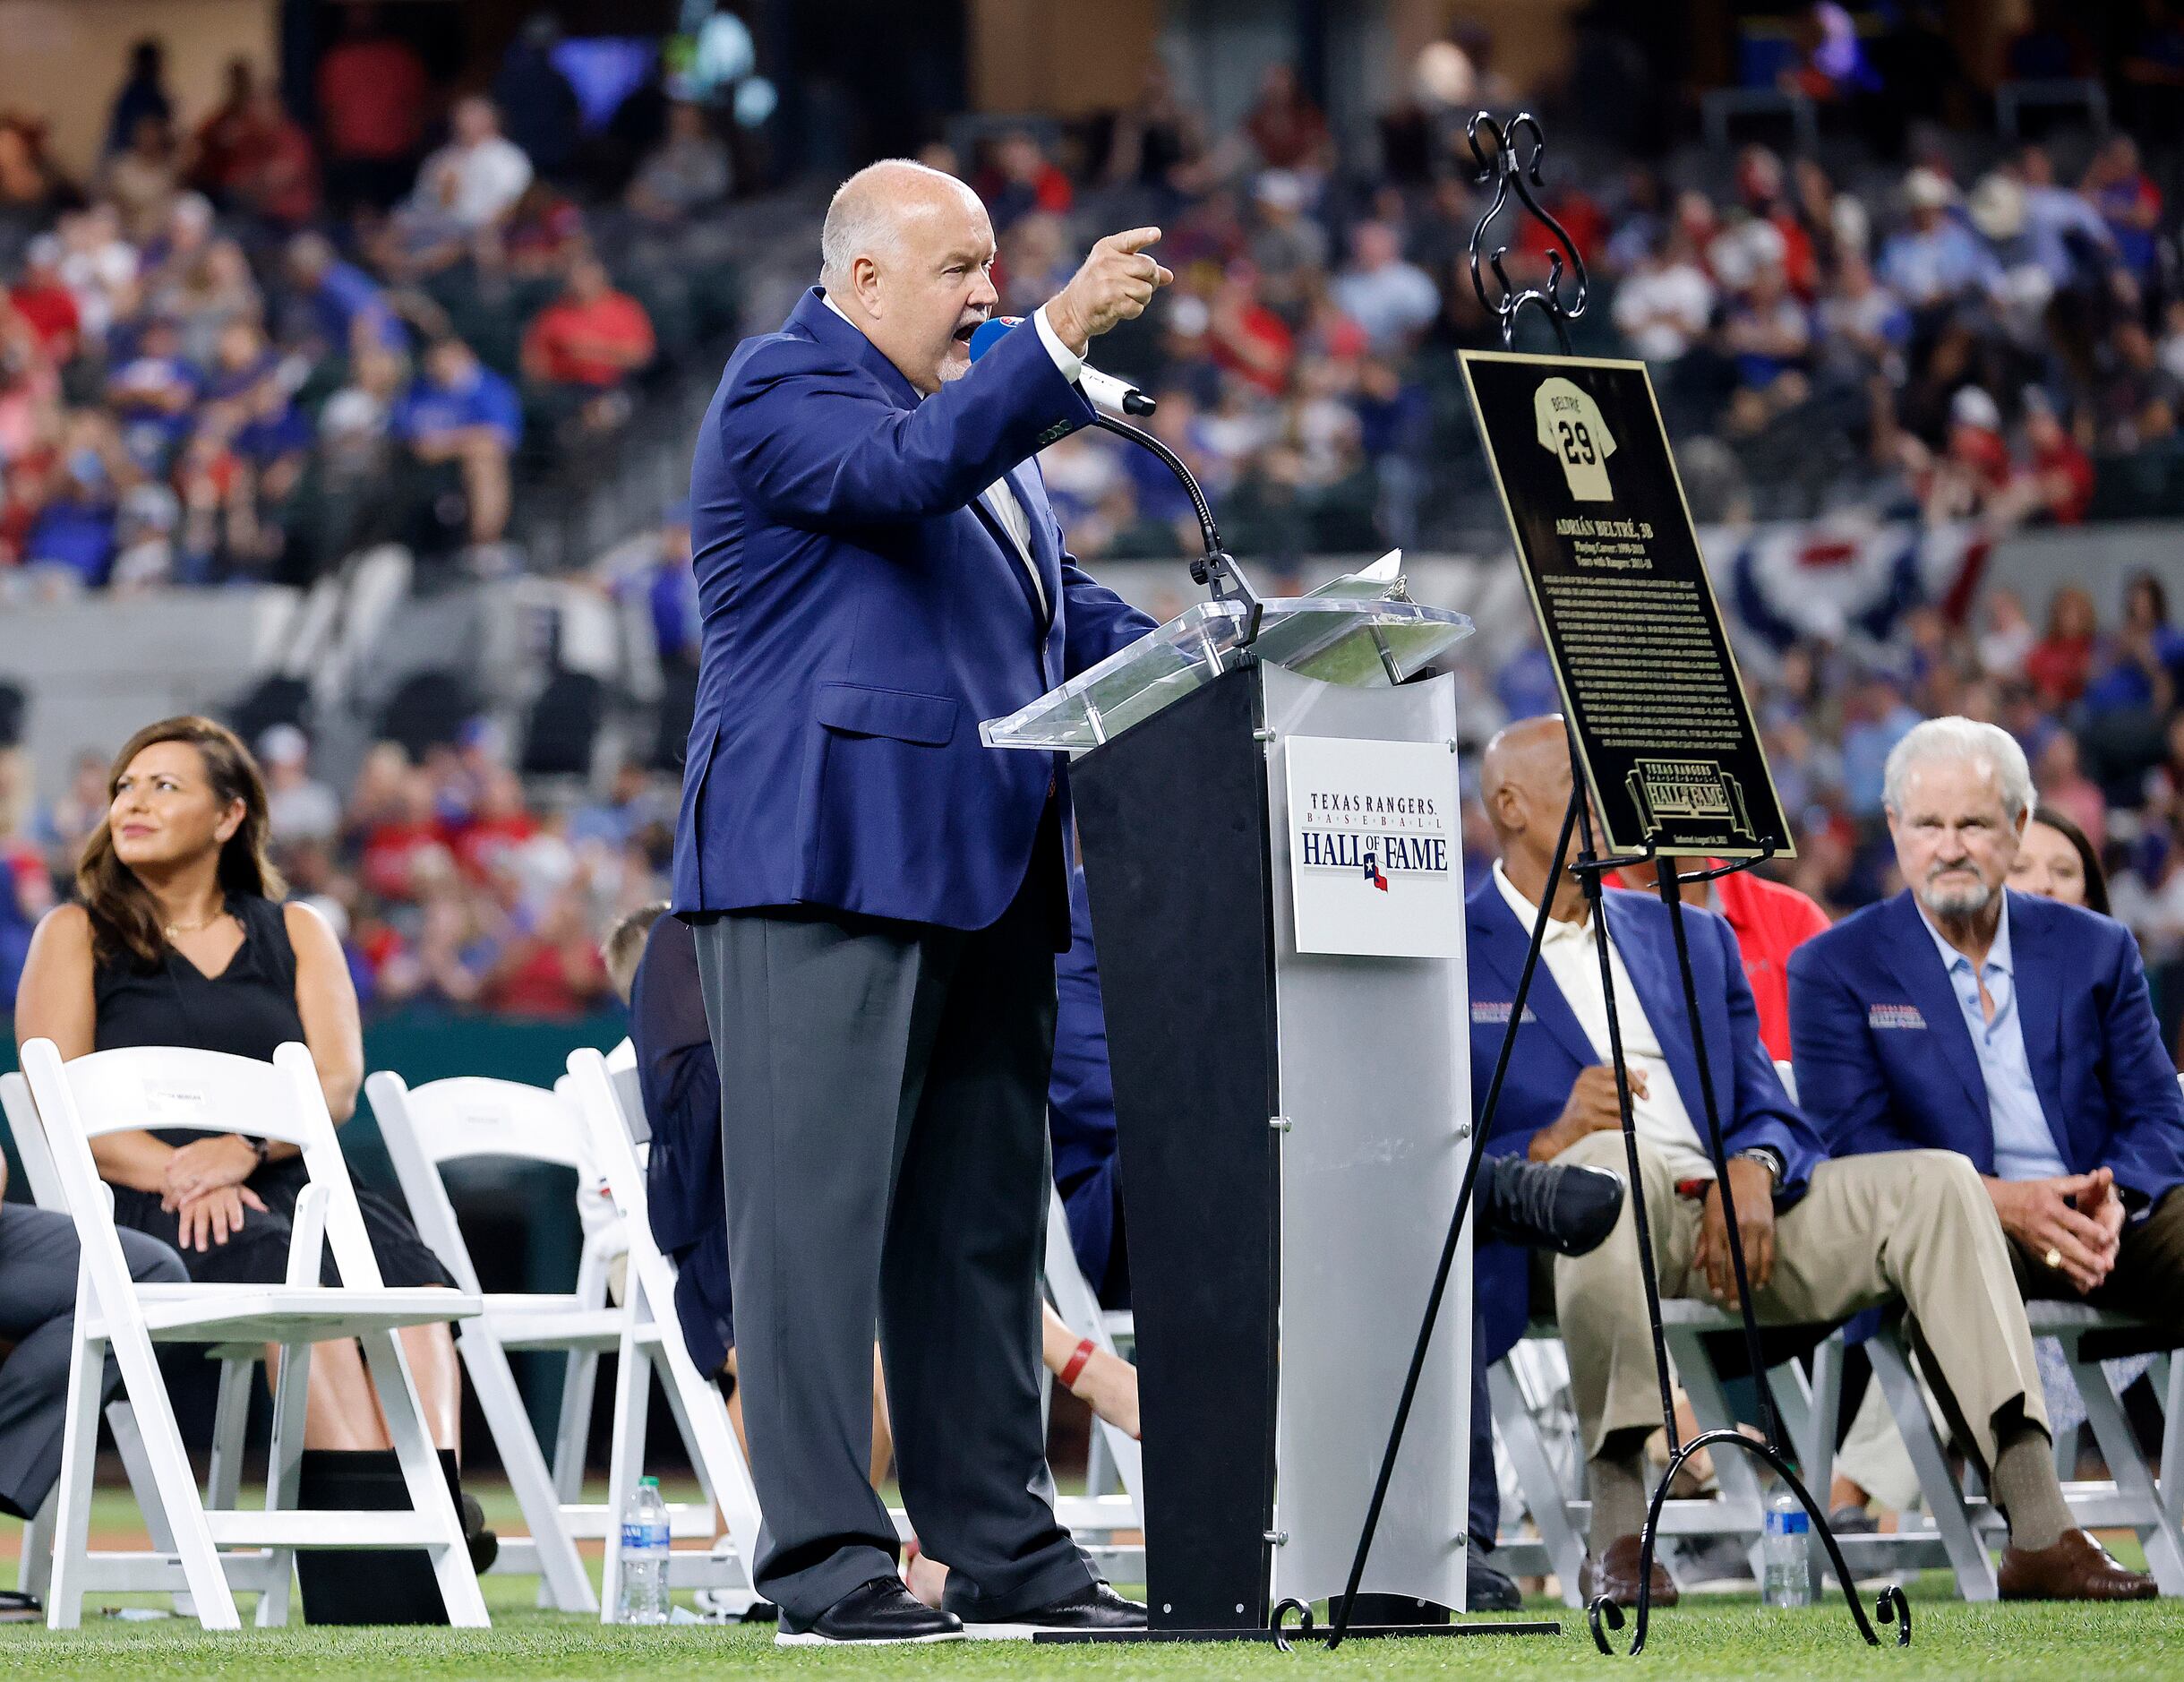 Adrian Beltre, PA announcer Chuck Morgan inducted into Rangers